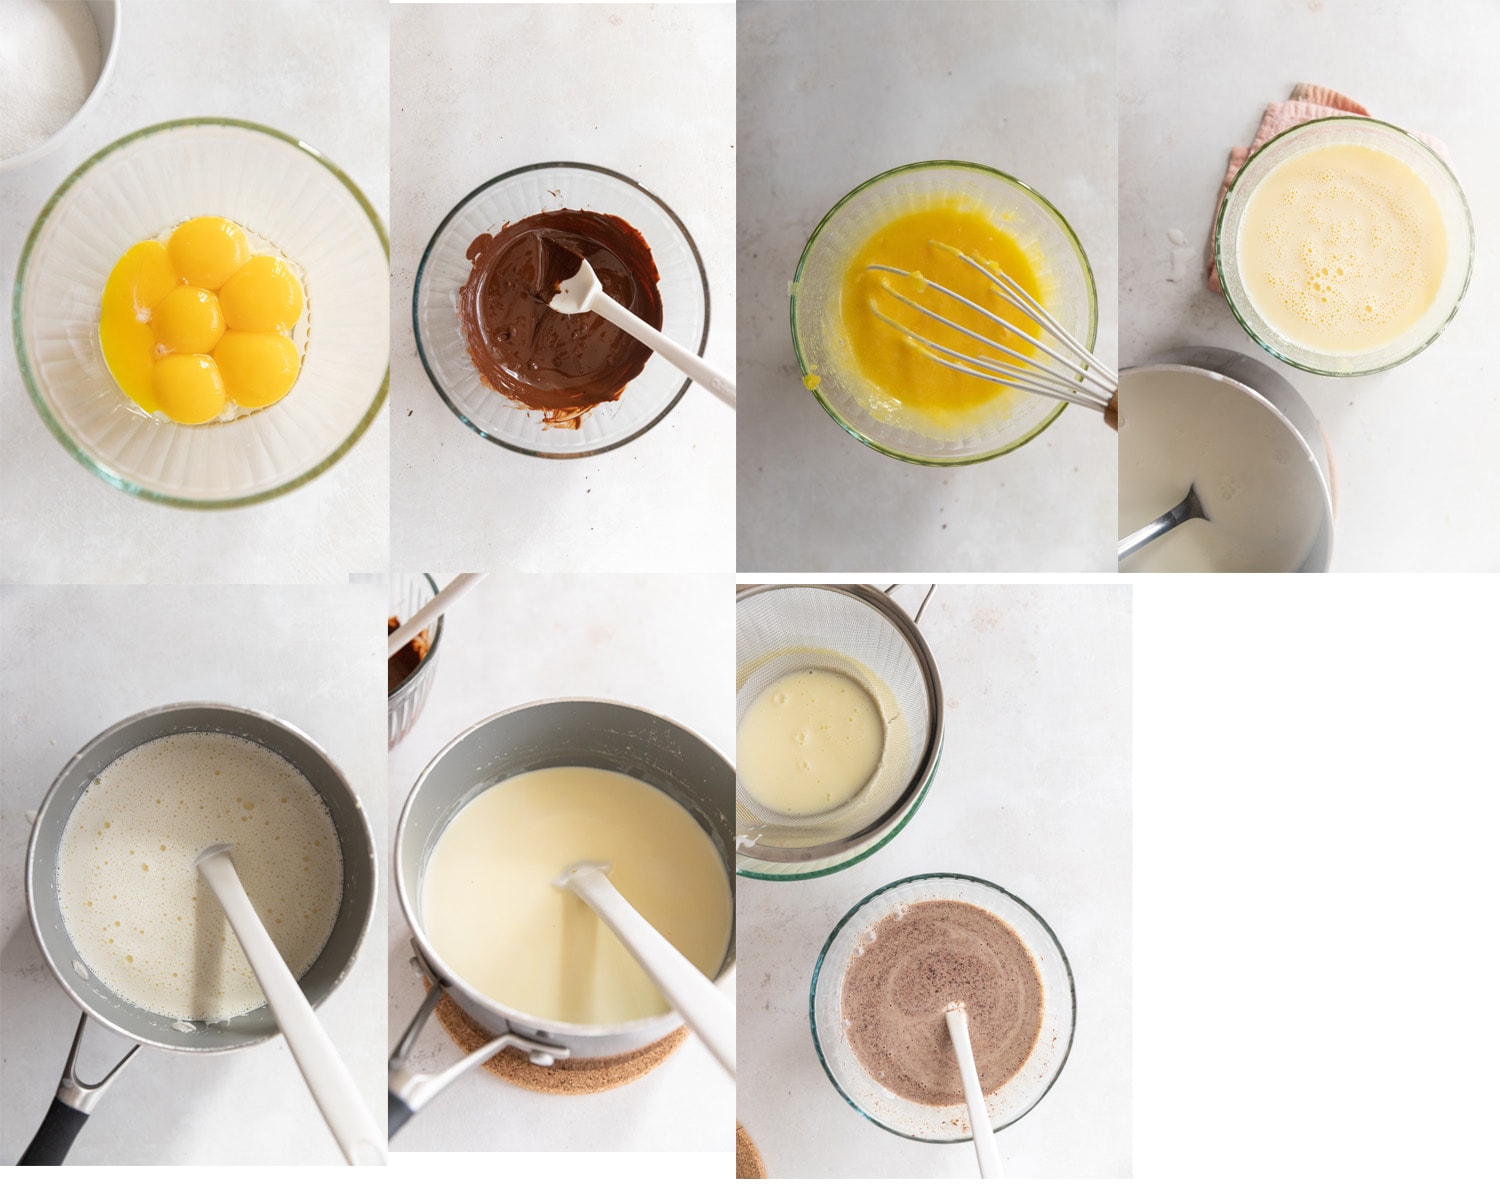 Process images showing how to make the ice cream custard base. 